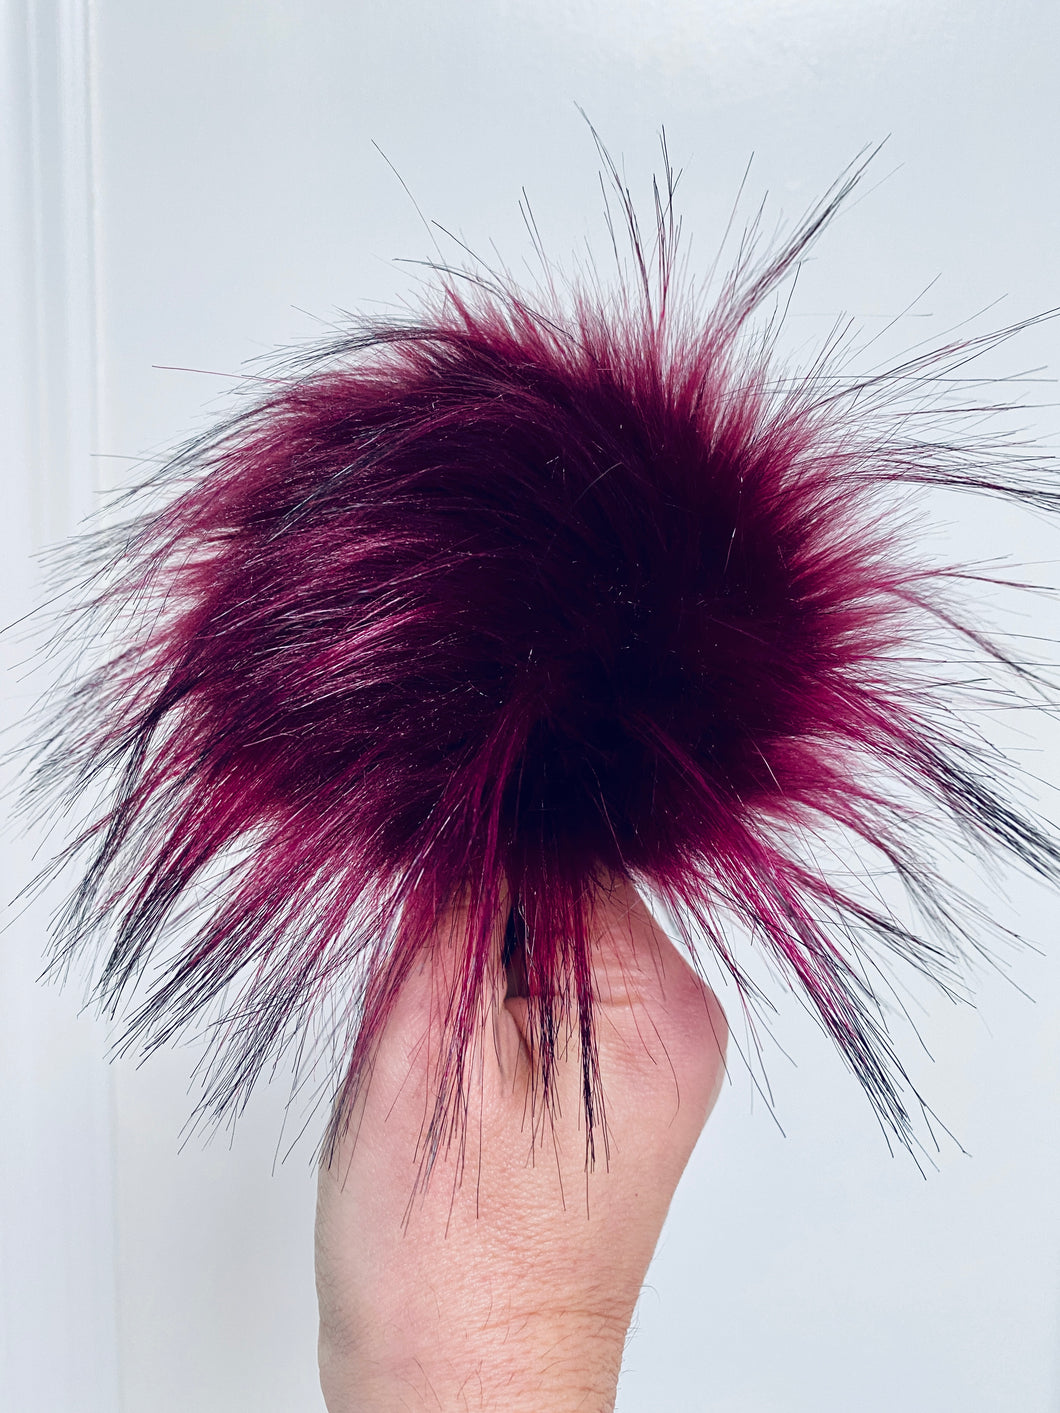 MADE TO ORDER Fun and funky merlot wine maroon with long black tips faux fur pom pom with wooden button